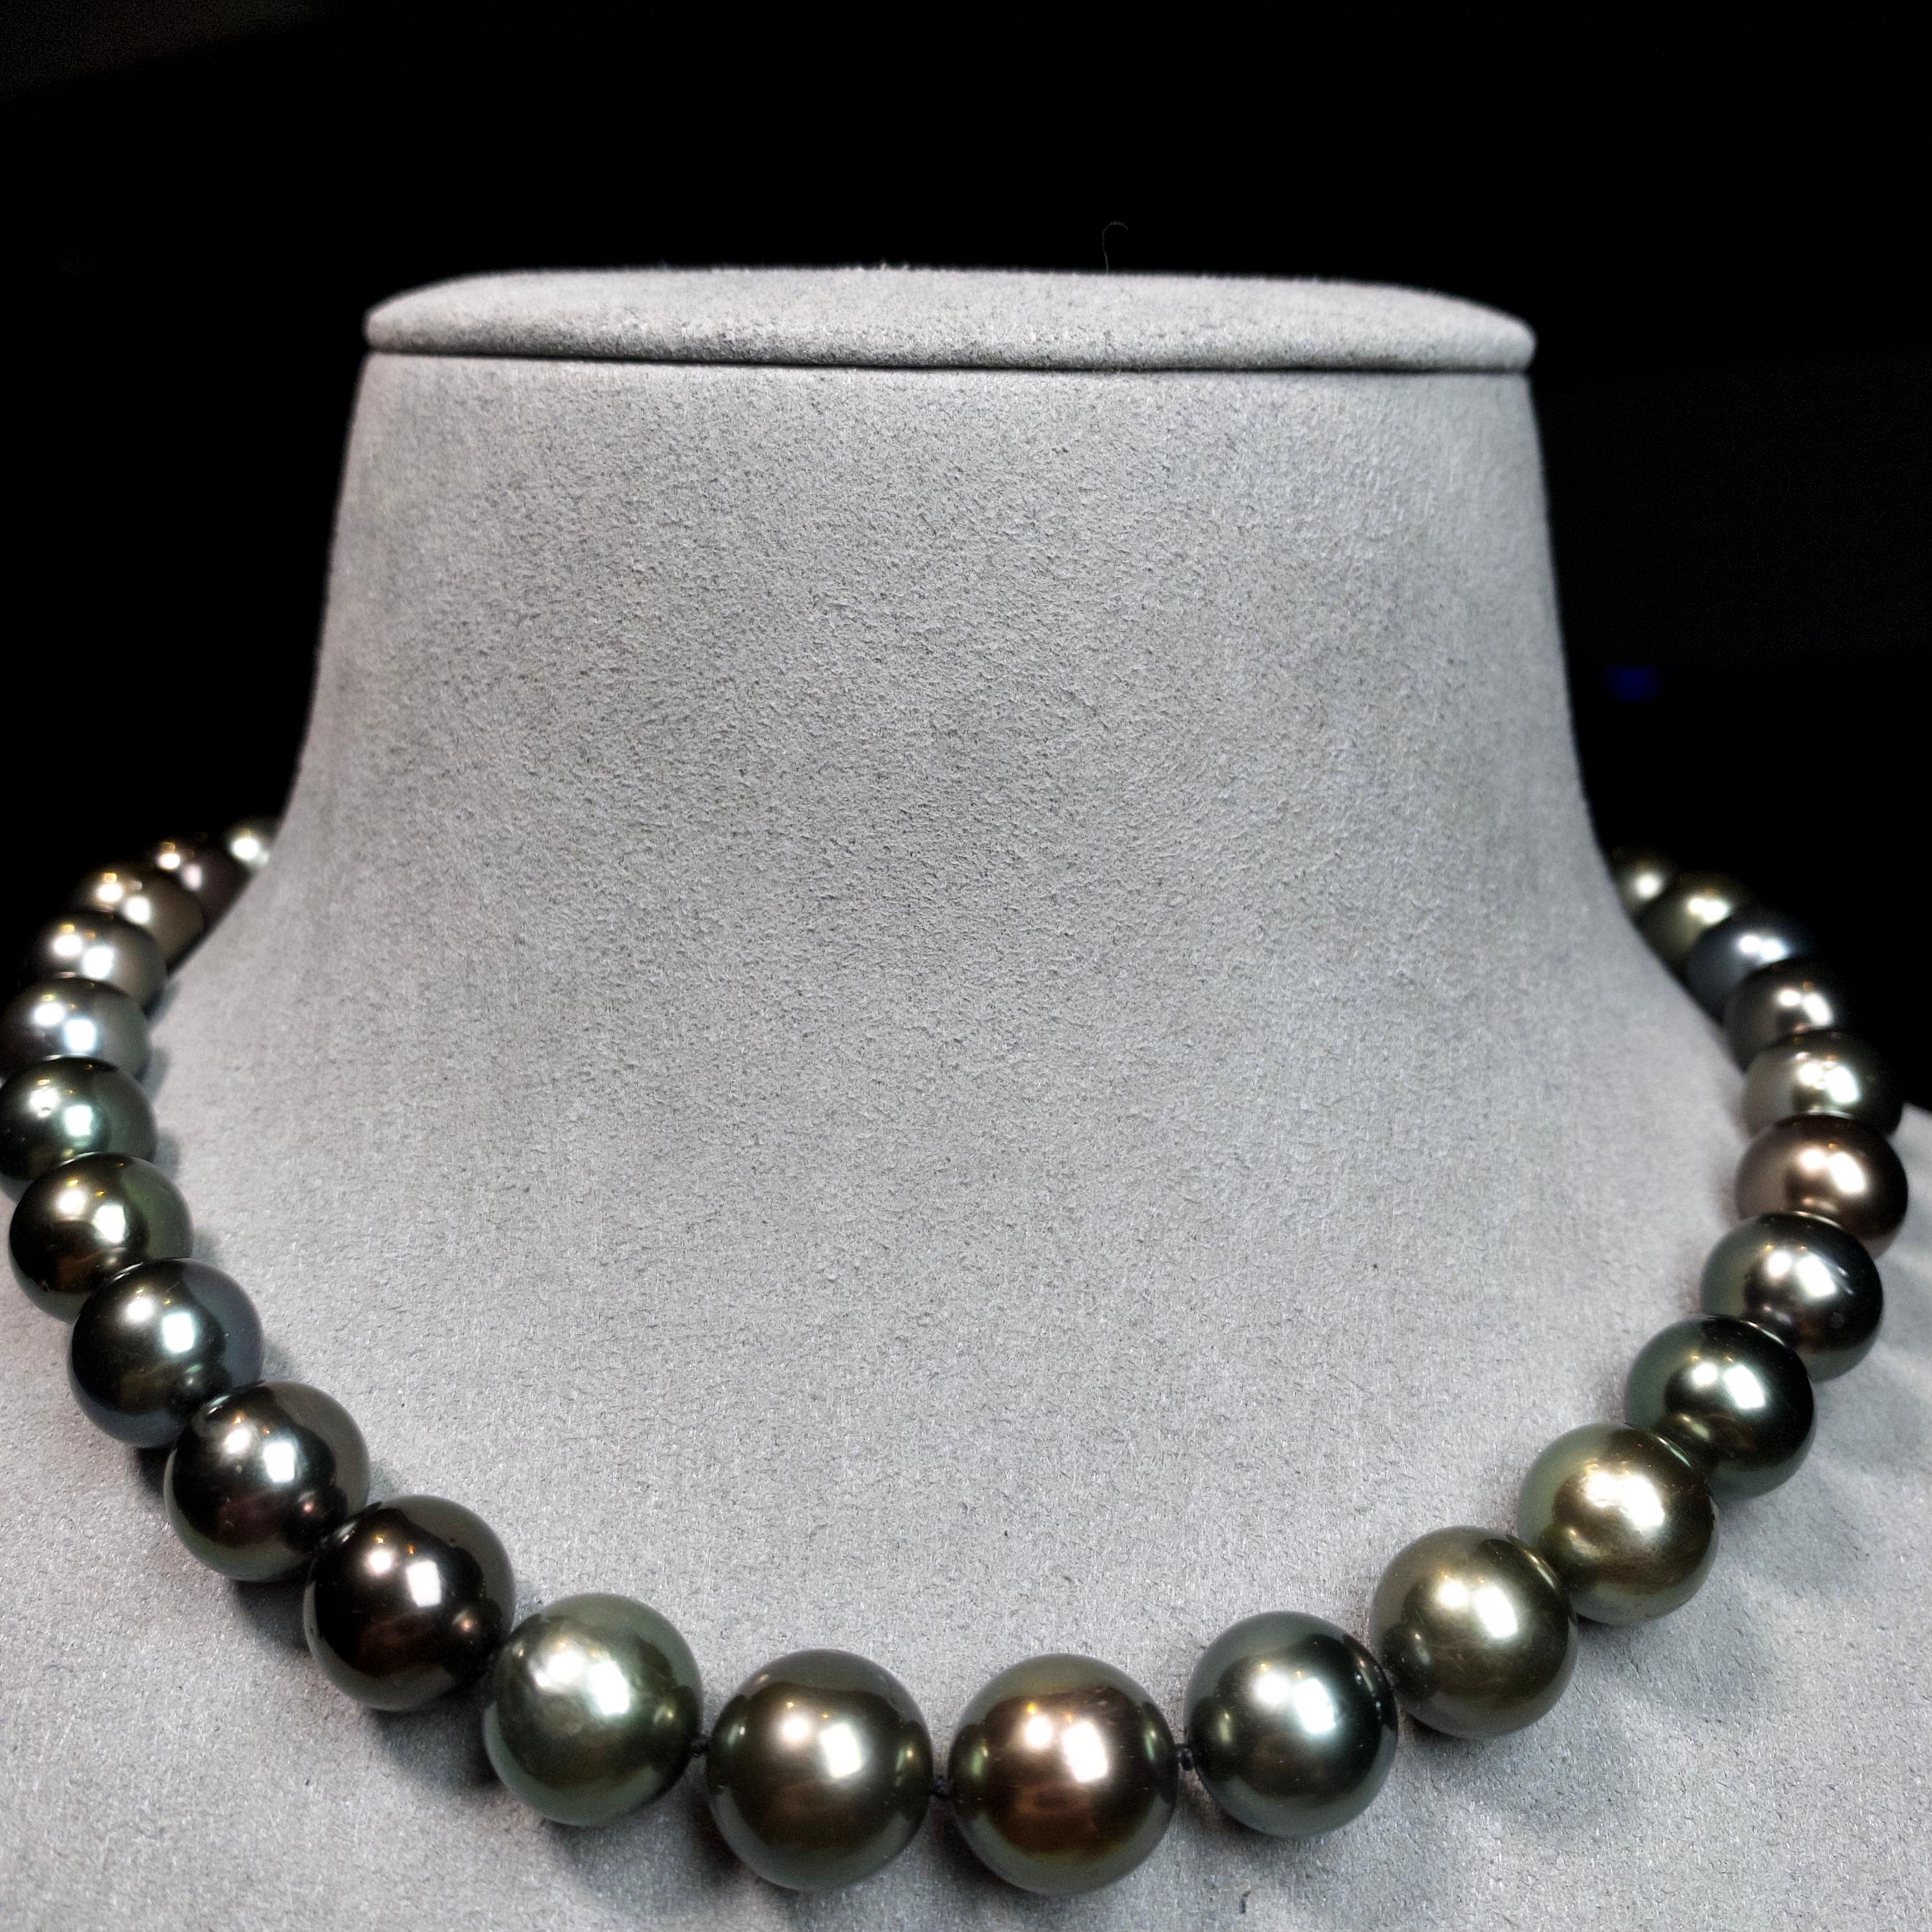 A Strand of Multi Colour Green tone Tahitian pearl necklace with 18K Gold Clasp. Green tone is very sought after in Tahitian pearls and therefore m more valuable. 

A 10.4 mm to 12.7 mm Multi Colour Green Tone Tahitian Pearl Necklace
It consists of